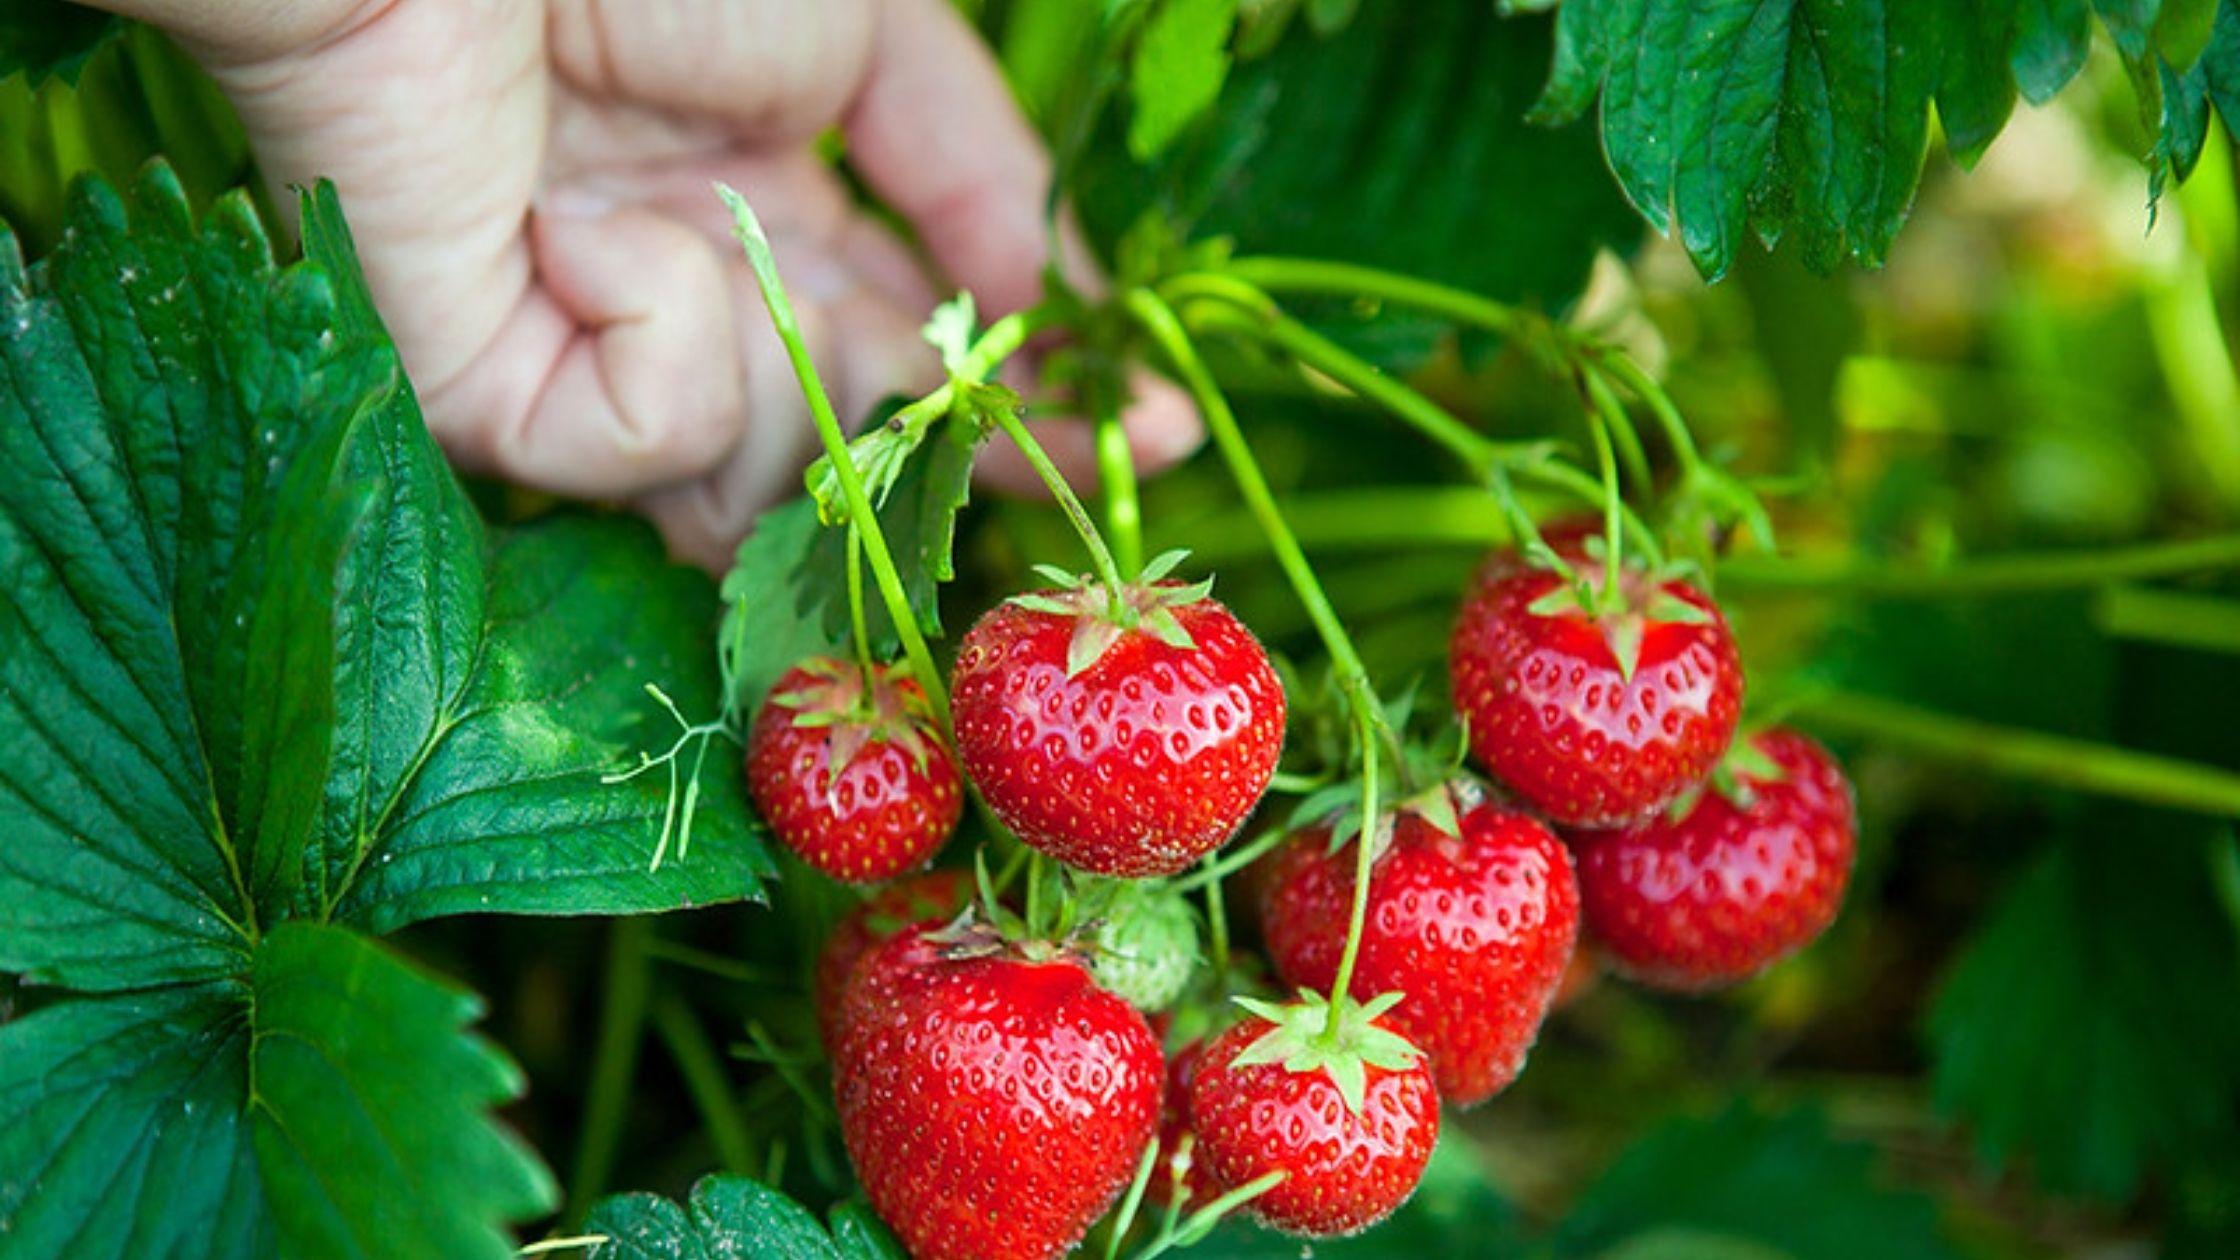 Bihar farmer started strawberry cultivation by watching youtube